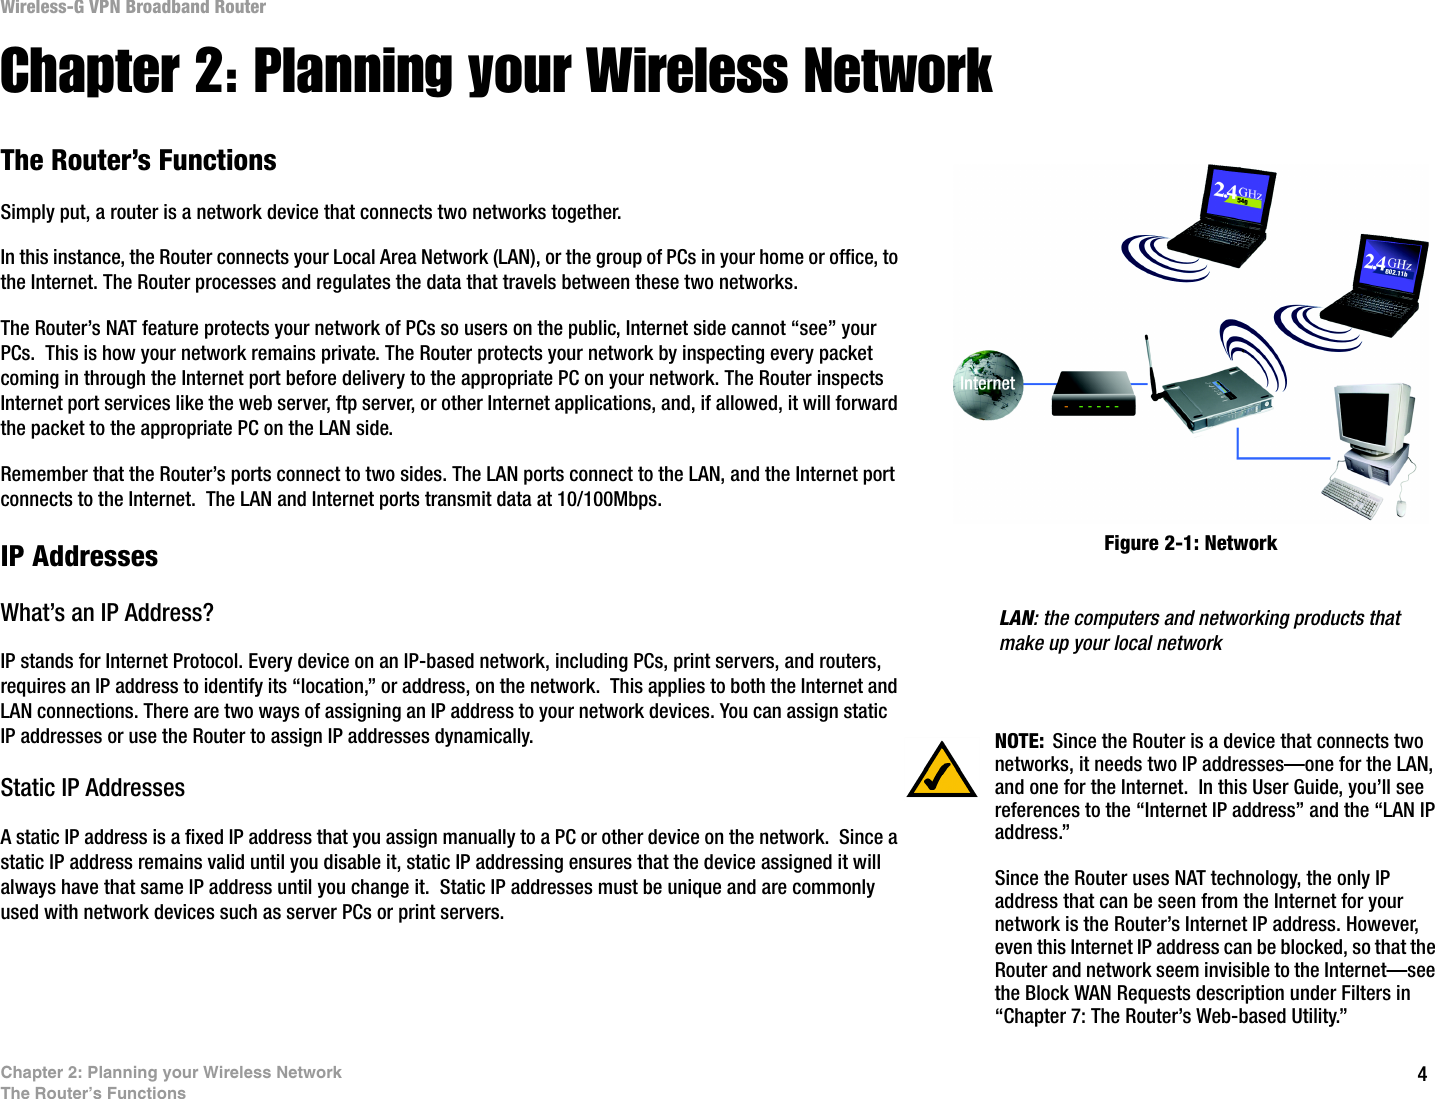 4Chapter 2: Planning your Wireless NetworkThe Router’s FunctionsWireless-G VPN Broadband RouterChapter 2: Planning your Wireless NetworkThe Router’s FunctionsSimply put, a router is a network device that connects two networks together. In this instance, the Router connects your Local Area Network (LAN), or the group of PCs in your home or office, to the Internet. The Router processes and regulates the data that travels between these two networks.The Router’s NAT feature protects your network of PCs so users on the public, Internet side cannot “see” your PCs.  This is how your network remains private. The Router protects your network by inspecting every packet coming in through the Internet port before delivery to the appropriate PC on your network. The Router inspects Internet port services like the web server, ftp server, or other Internet applications, and, if allowed, it will forward the packet to the appropriate PC on the LAN side.Remember that the Router’s ports connect to two sides. The LAN ports connect to the LAN, and the Internet port connects to the Internet.  The LAN and Internet ports transmit data at 10/100Mbps.IP AddressesWhat’s an IP Address?IP stands for Internet Protocol. Every device on an IP-based network, including PCs, print servers, and routers, requires an IP address to identify its “location,” or address, on the network.  This applies to both the Internet and LAN connections. There are two ways of assigning an IP address to your network devices. You can assign static IP addresses or use the Router to assign IP addresses dynamically.Static IP Addresses  A static IP address is a fixed IP address that you assign manually to a PC or other device on the network.  Since a static IP address remains valid until you disable it, static IP addressing ensures that the device assigned it will always have that same IP address until you change it.  Static IP addresses must be unique and are commonly used with network devices such as server PCs or print servers. LAN: the computers and networking products that make up your local networkNOTE: Since the Router is a device that connects two networks, it needs two IP addresses—one for the LAN, and one for the Internet.  In this User Guide, you’ll see references to the “Internet IP address” and the “LAN IP address.”Since the Router uses NAT technology, the only IP address that can be seen from the Internet for your network is the Router’s Internet IP address. However, even this Internet IP address can be blocked, so that the Router and network seem invisible to the Internet—see the Block WAN Requests description under Filters in “Chapter 7: The Router’s Web-based Utility.”Figure 2-1: Network